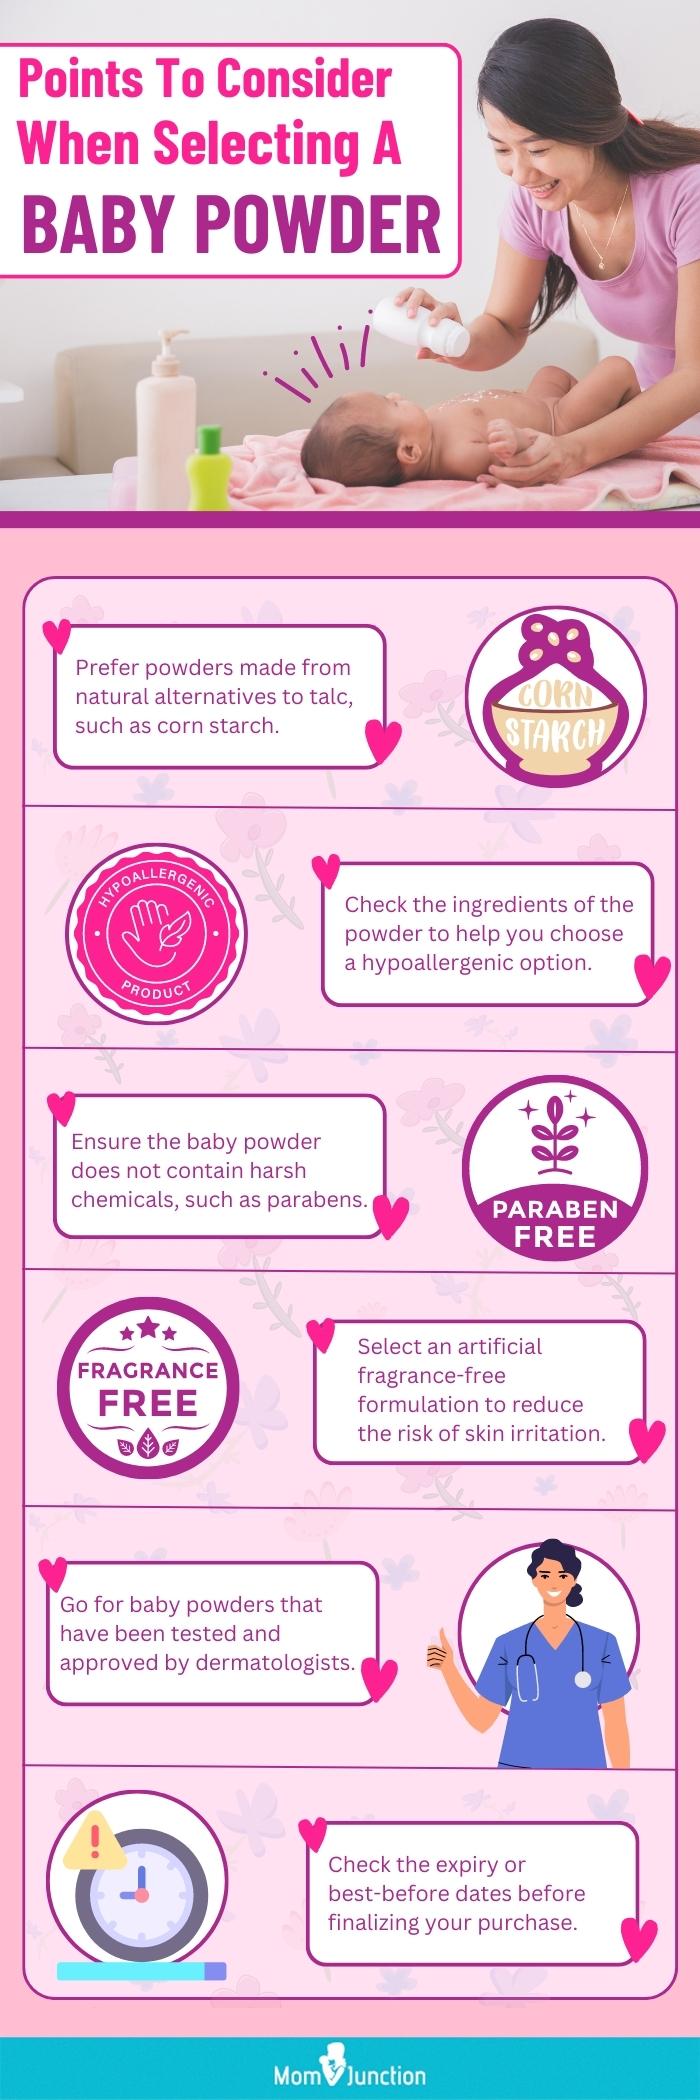 Points To Consider When Selecting A Baby Powder (infographic)